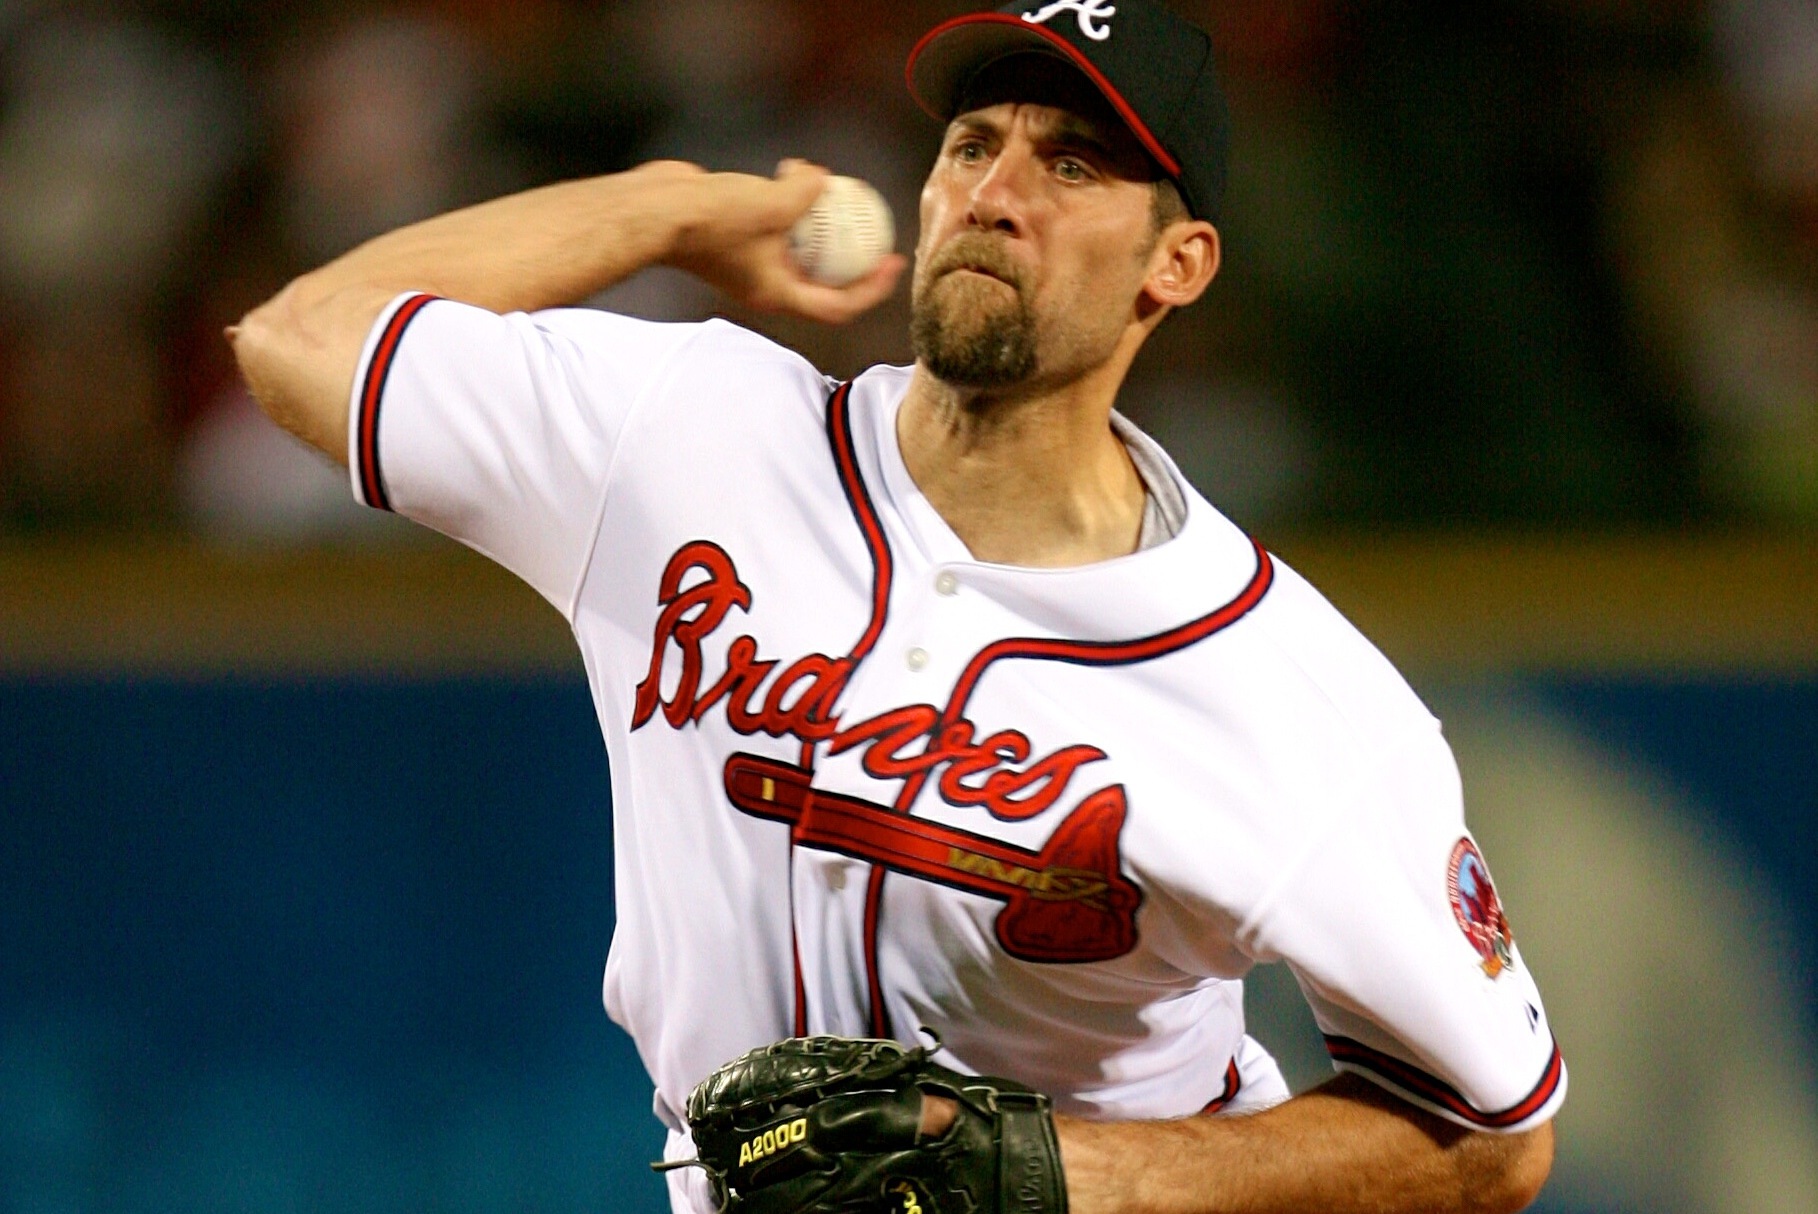 John Smoltz worries he may be last Tommy John pitcher in Hall of Fame